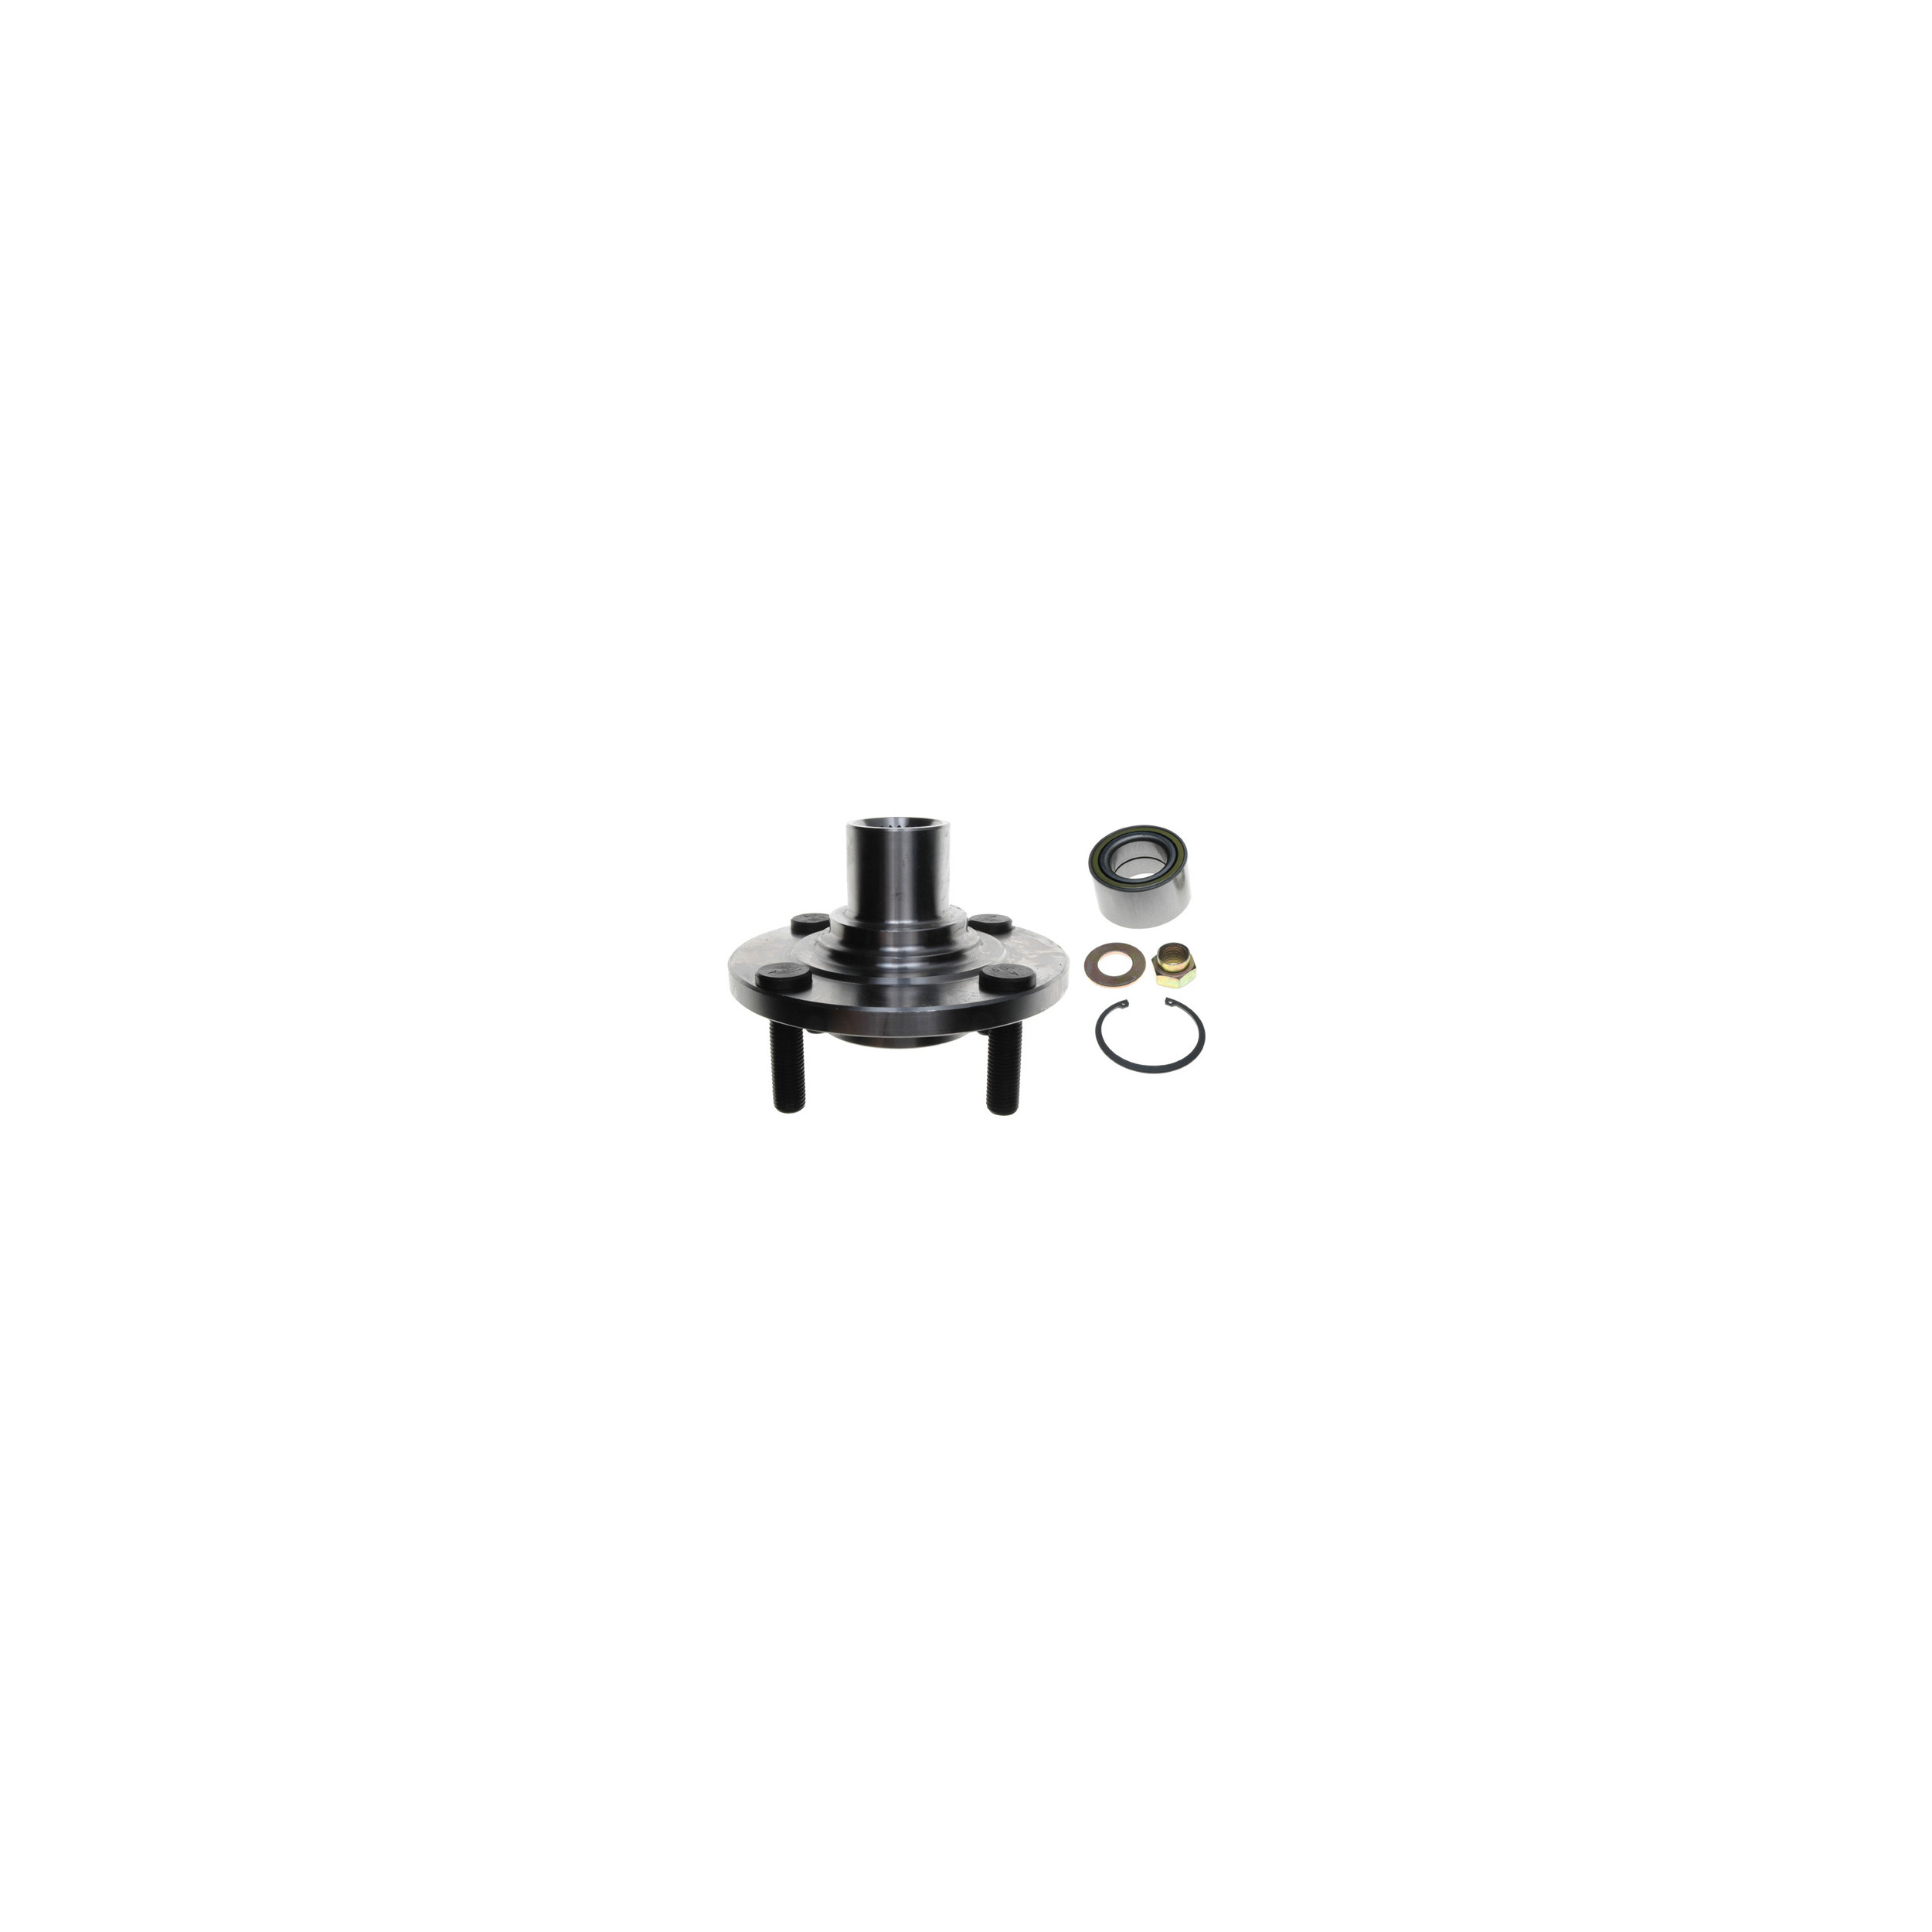 Raybestos 718503 Professional Grade Wheel Hub Repair Kit Fits select: 1983-1990 FORD ESCORT, 1984-1994 FORD TEMPO - image 2 of 3